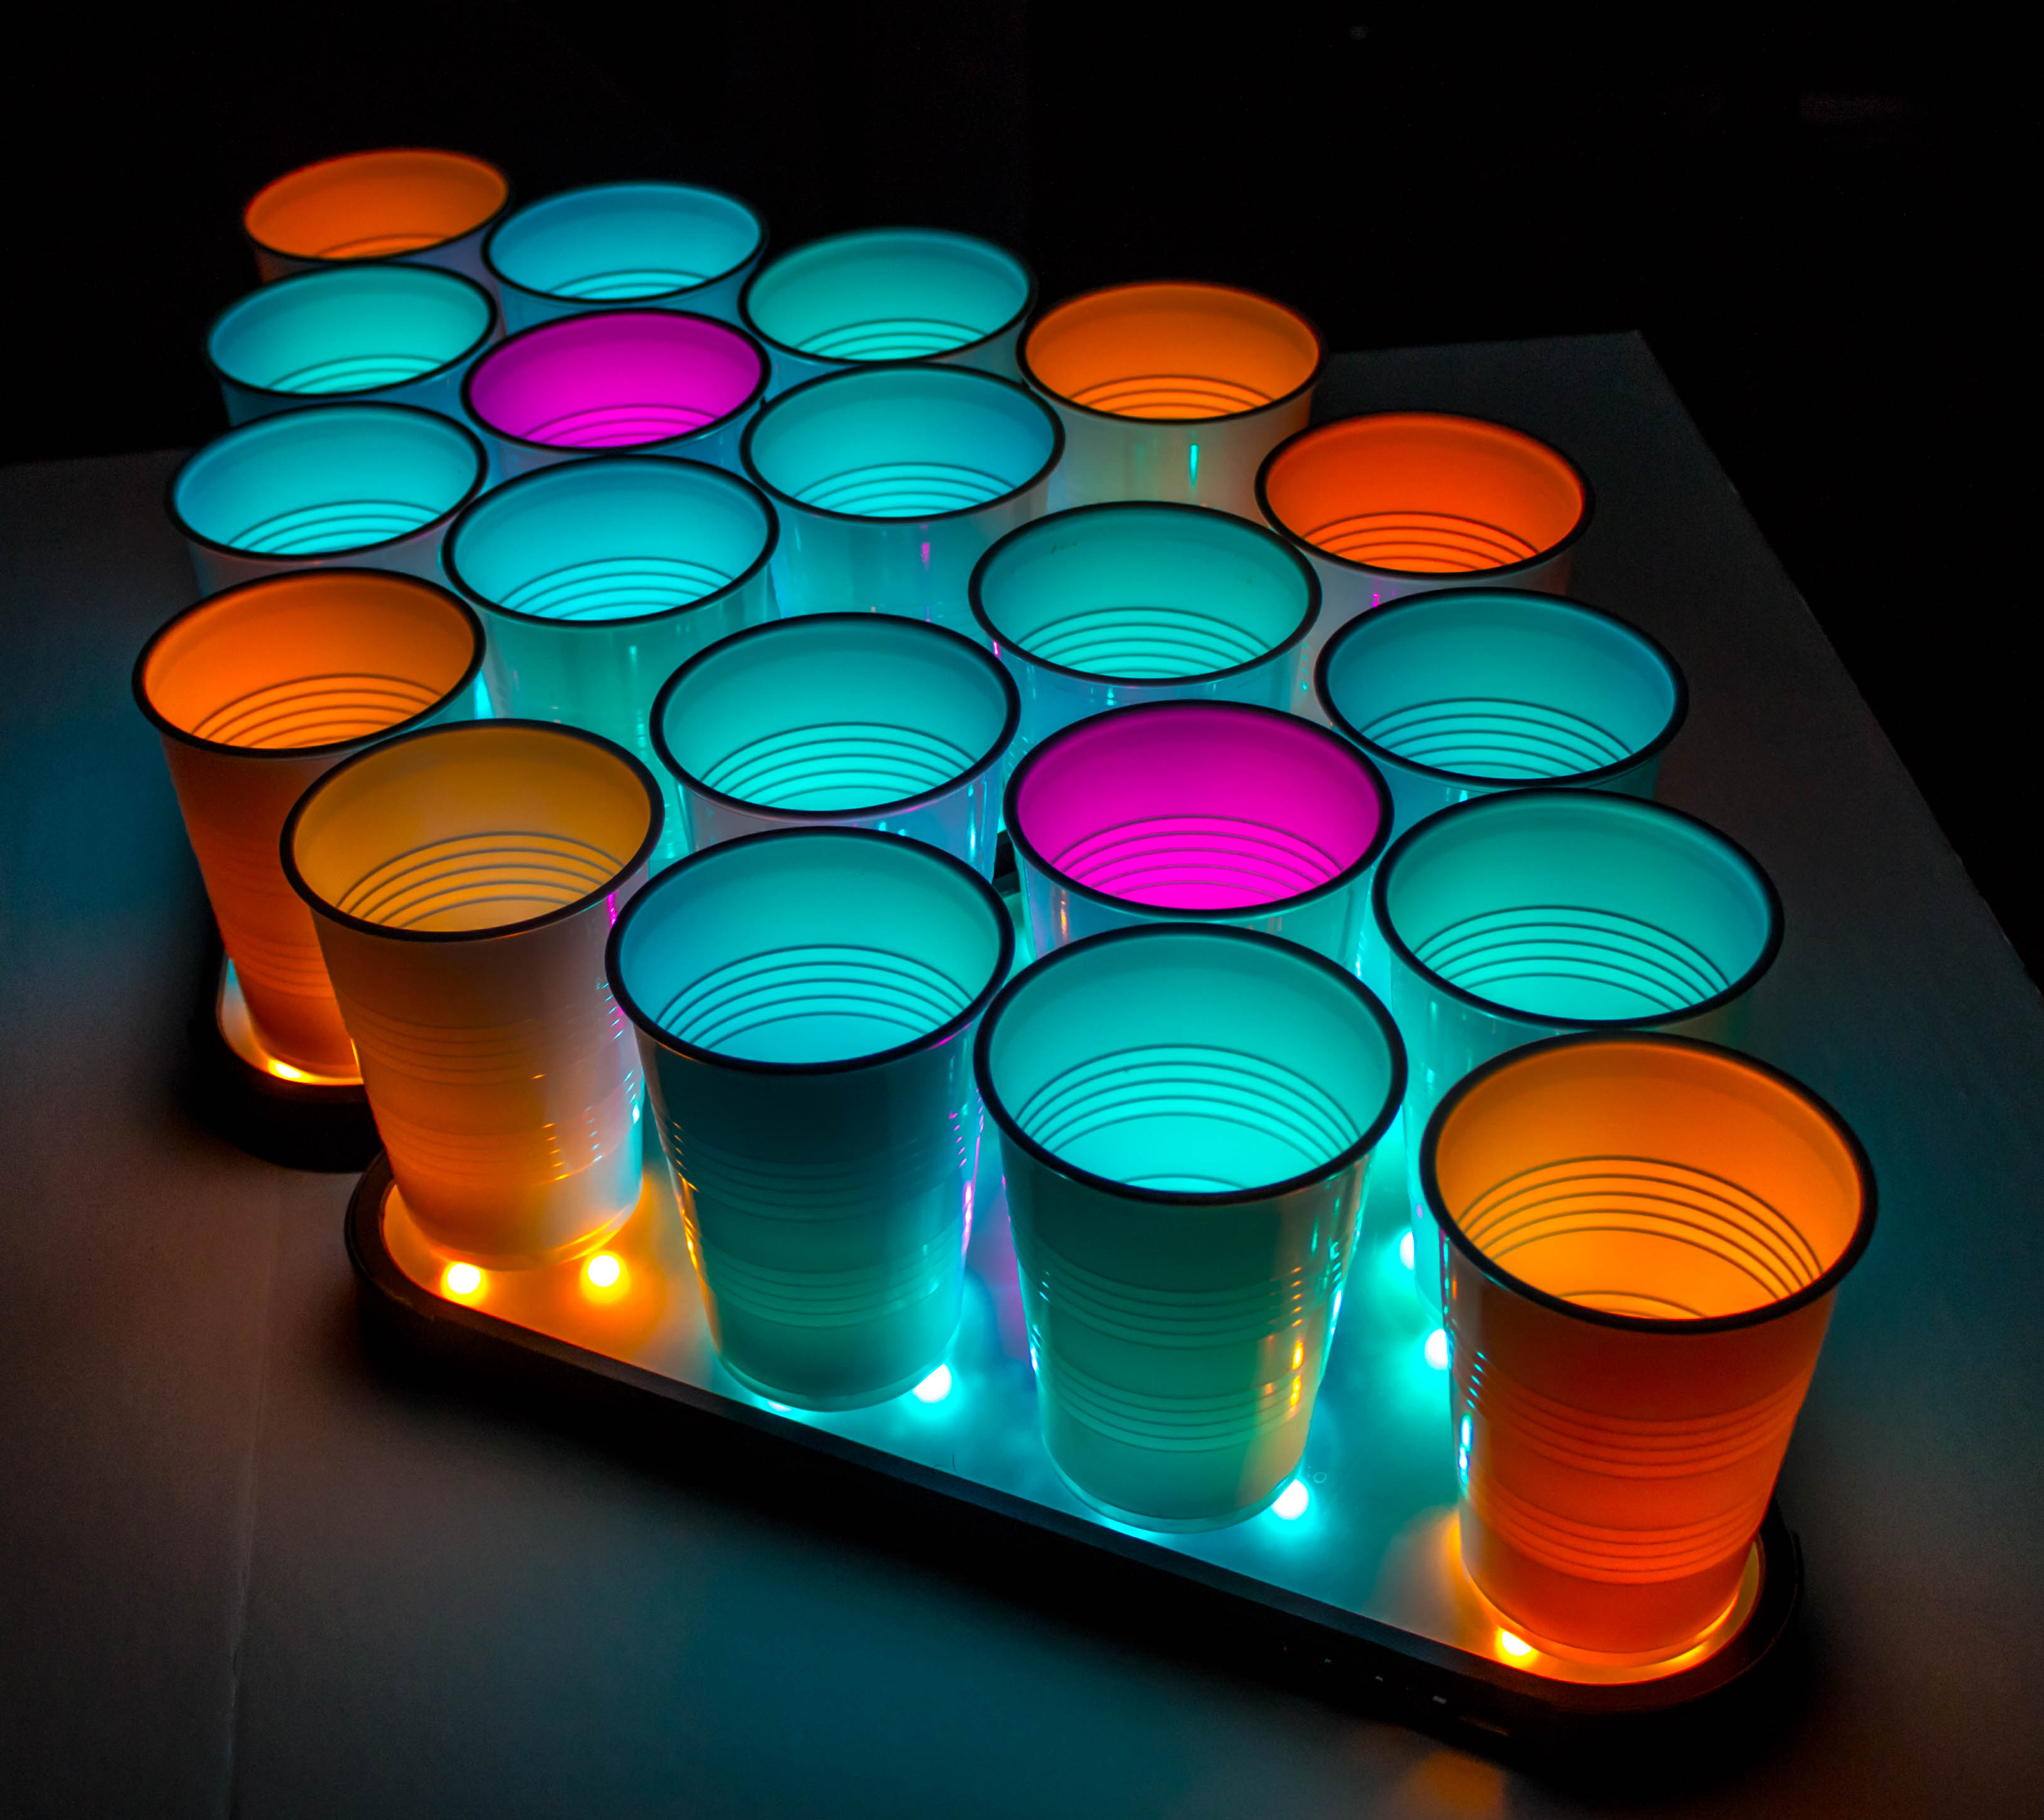 Portable Beer Pong Table –